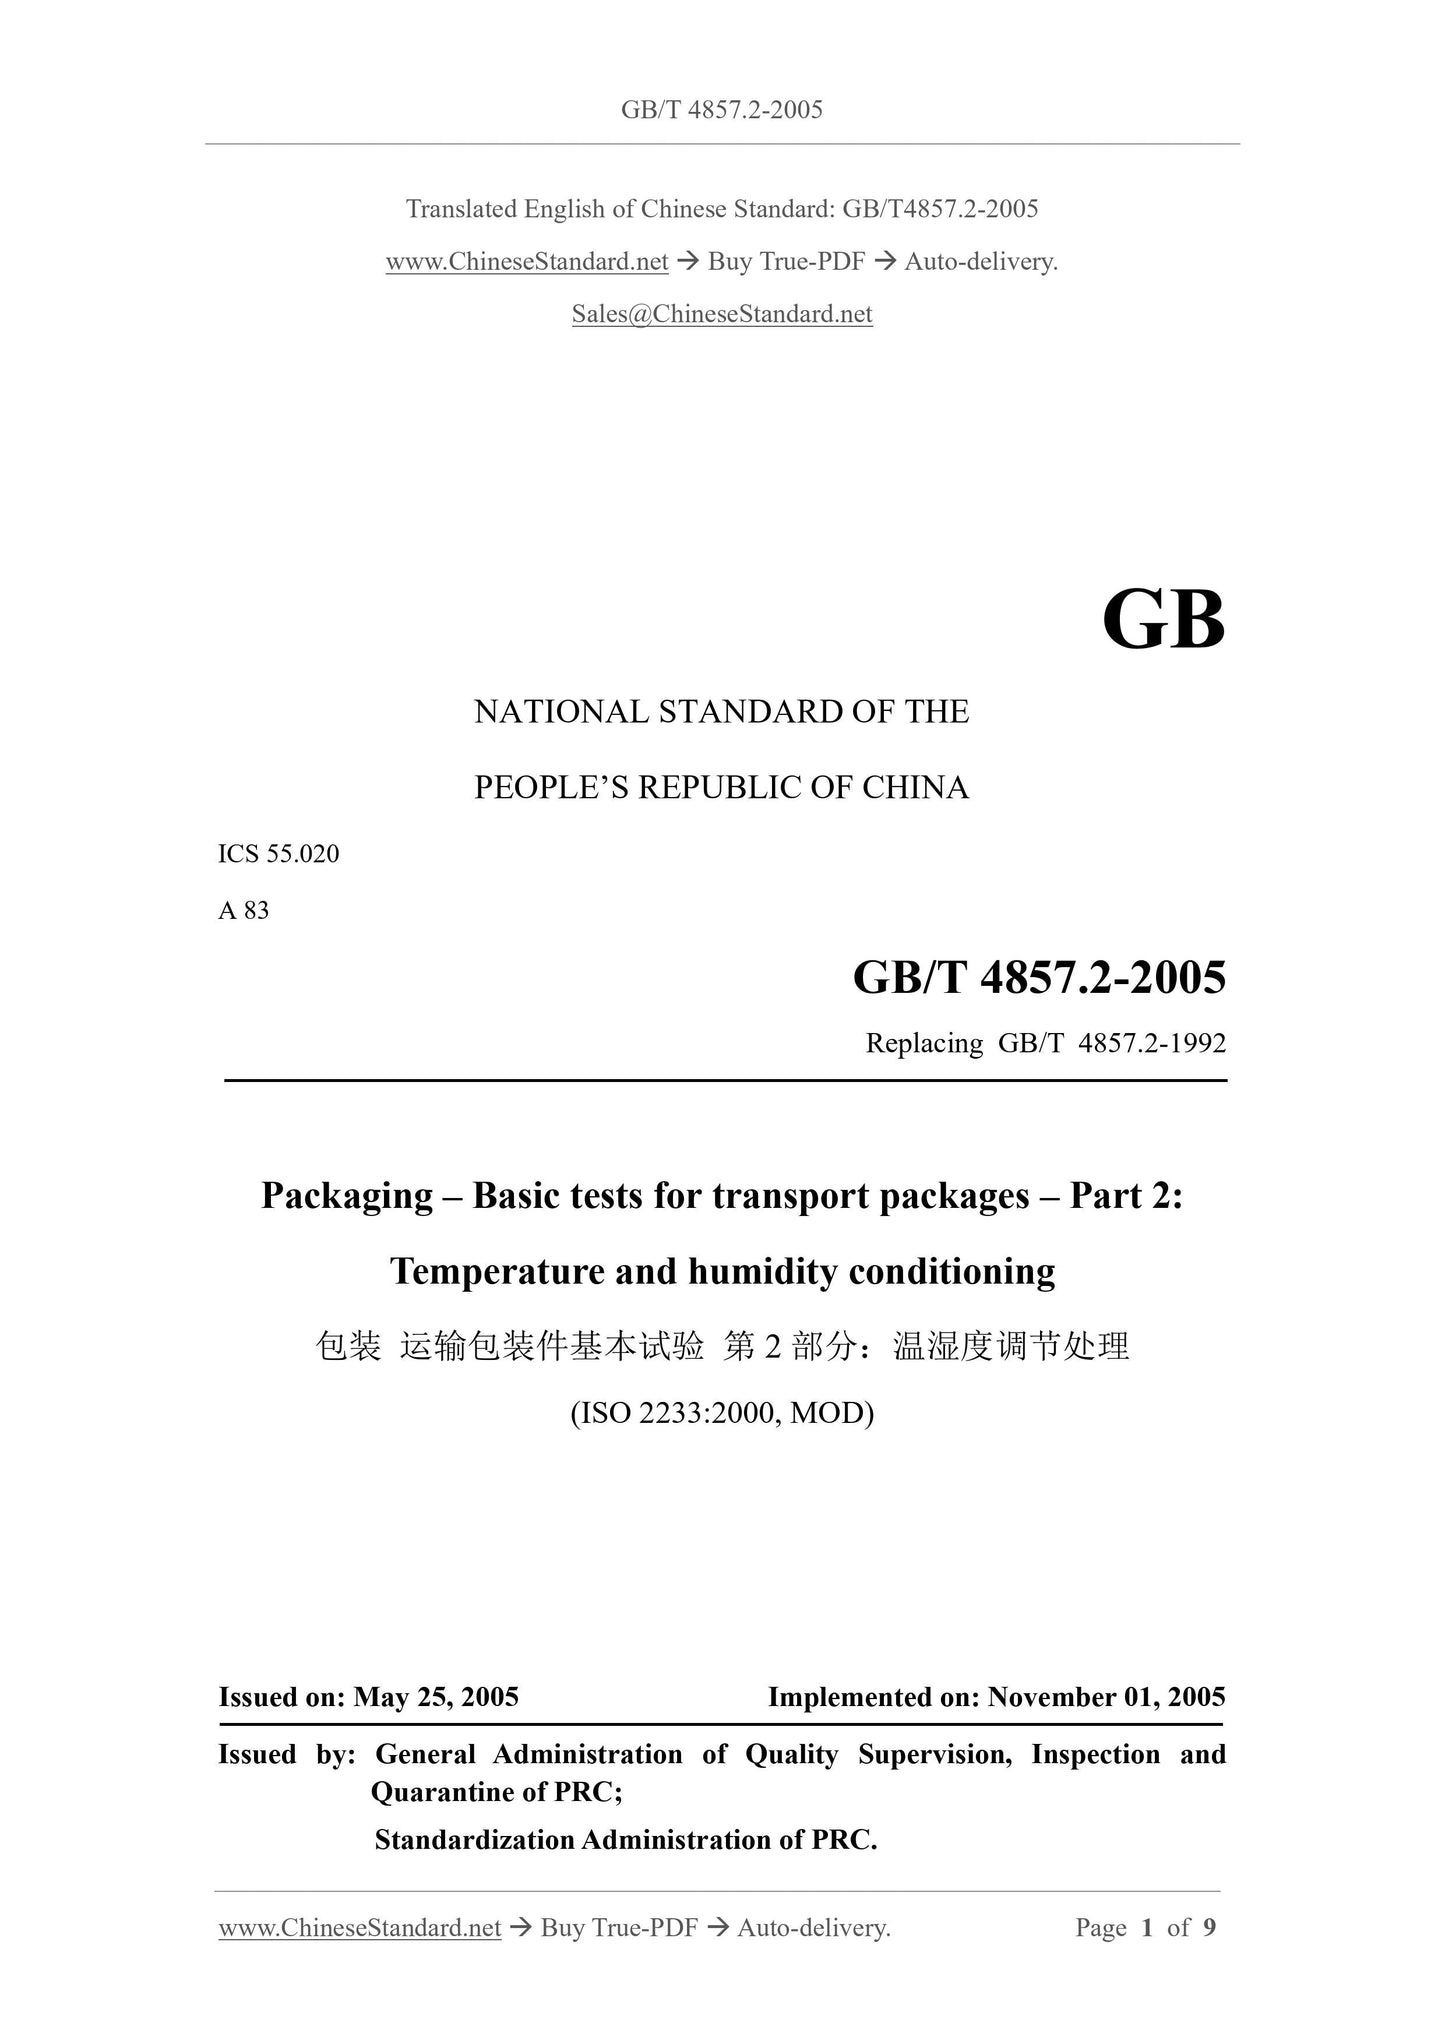 GB/T 4857.2-2005 Page 1